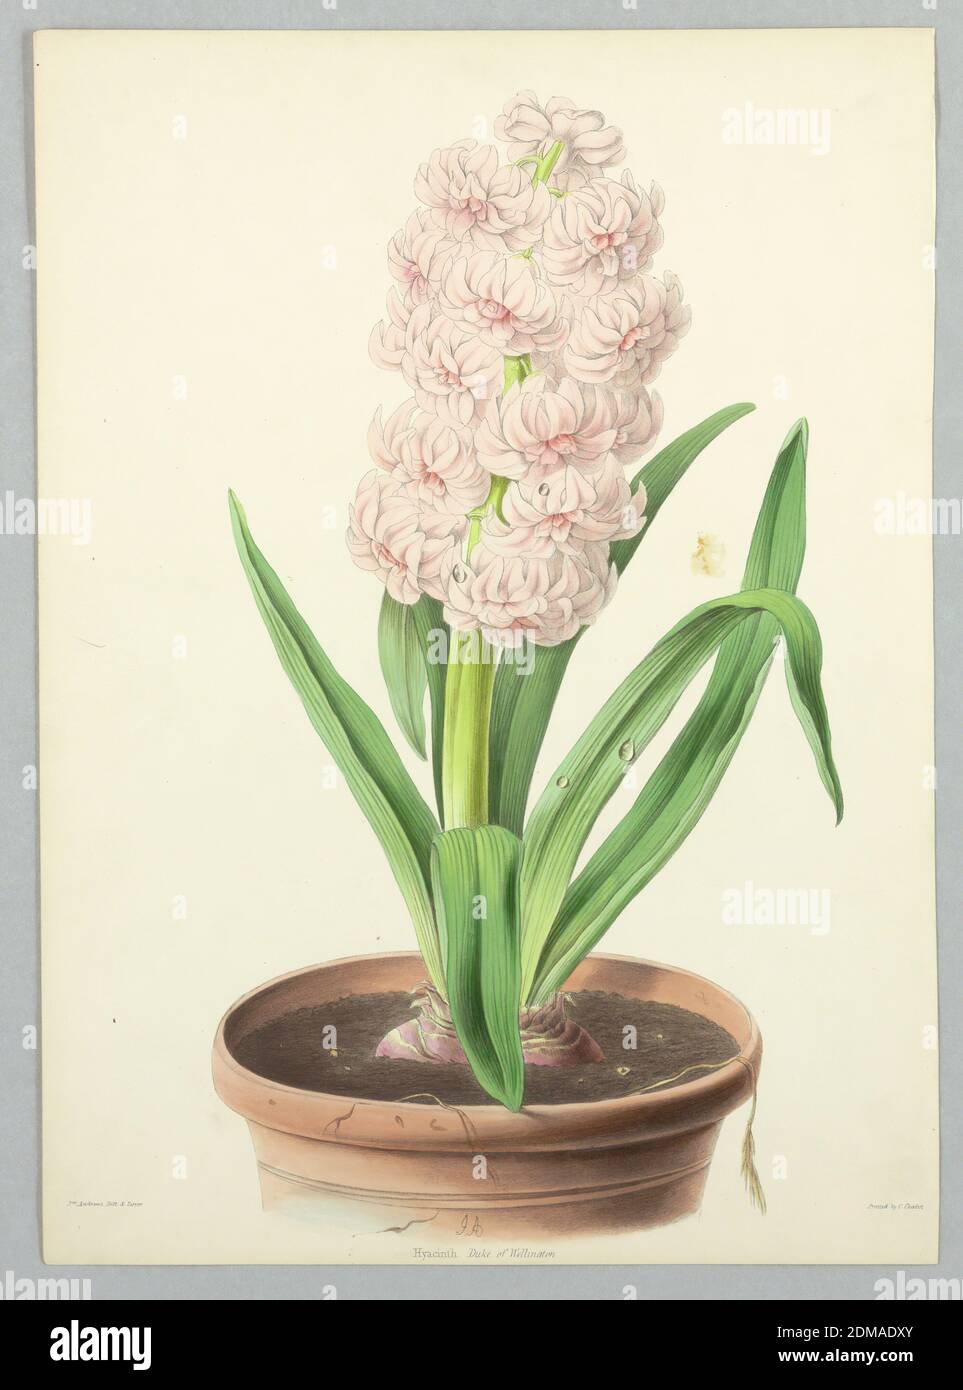 Hyacinth, Duke of Wellington, Plate from Edward George Henderson's 'The Illustrated Bouquet', E. G. Henderson and Son, English, ca. 1859 - 1886, James Andrews, British, 1801 - 1876, Chromolithograph on paper, Hyacinth, Duke of Wellington, Plate from Edward George Henderson's 'The Illustrated Bouquet.', London, England, ca. 1857–1864, Print Stock Photo